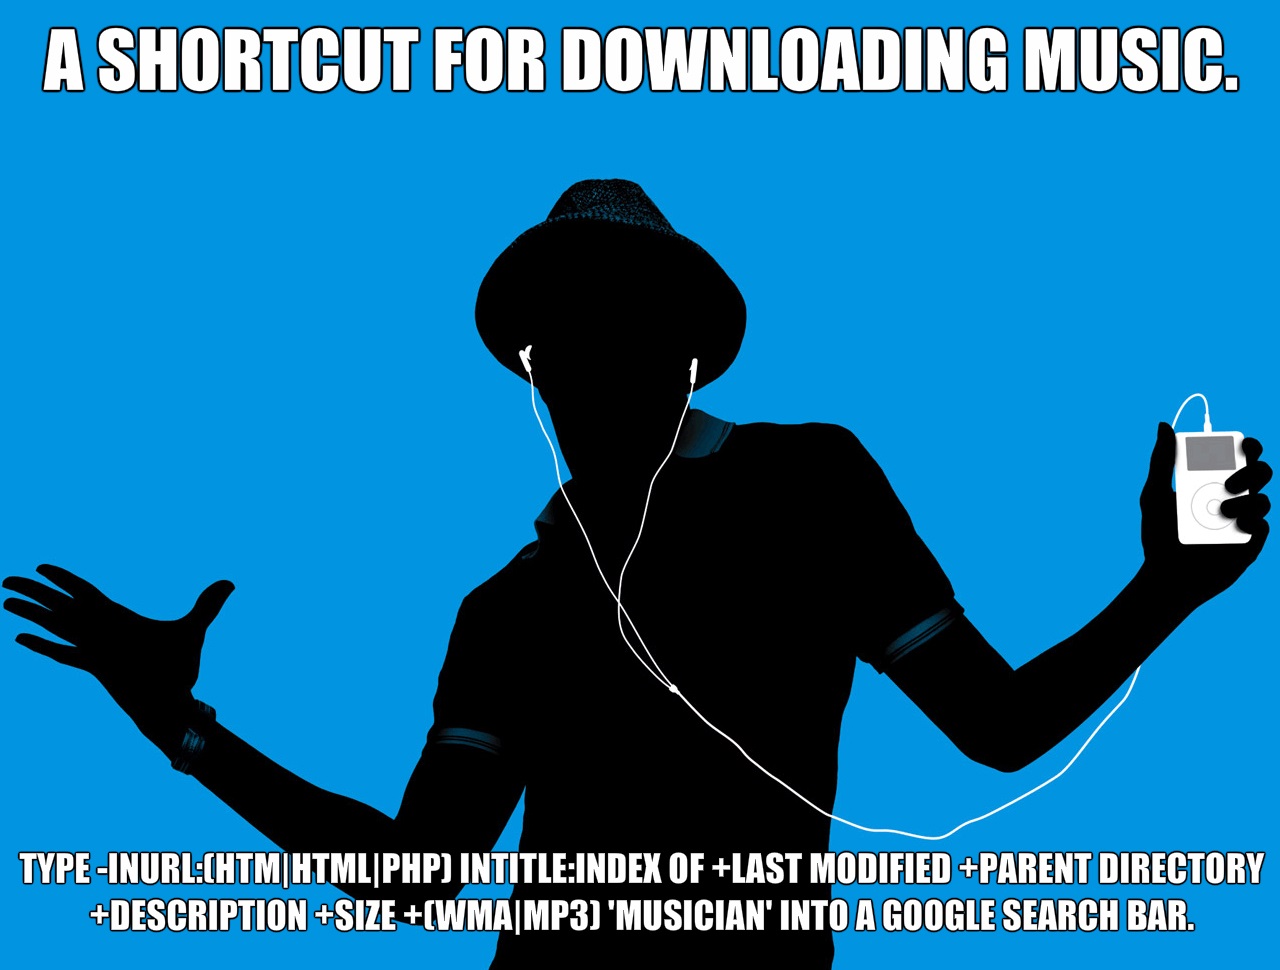 ipod people - A Shortcut For Downloading Music TypeInurlChtm|HtmlPhp IntitleIndex Of Last Modified Parent Directory Description Size WmaMP3 'Musician' Into A Google Search Bar.